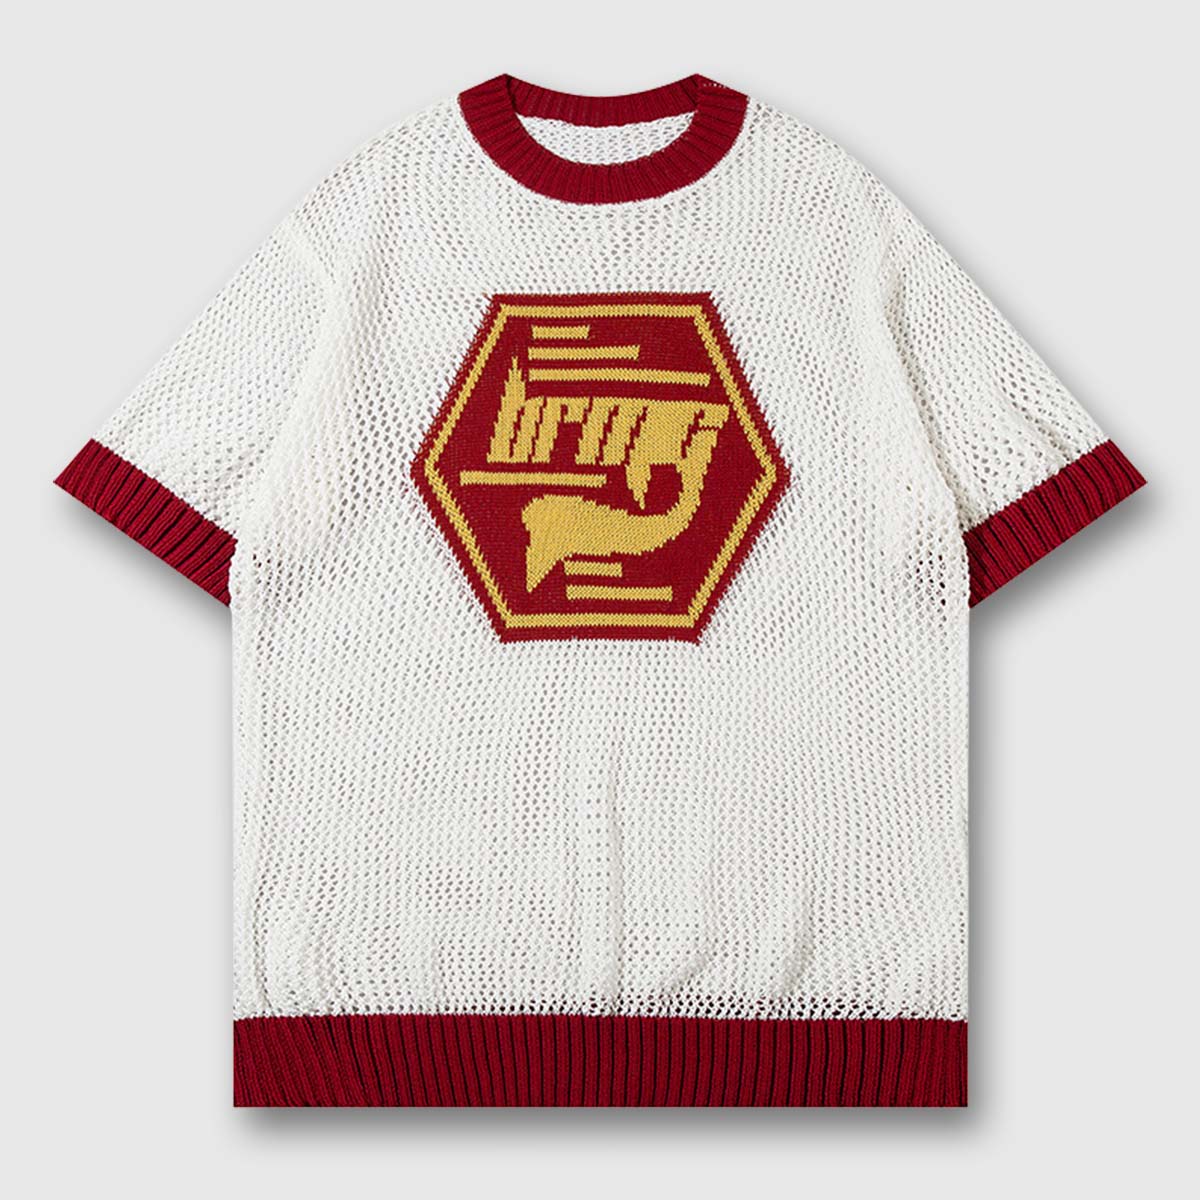 Red Crest White Knit Sweater